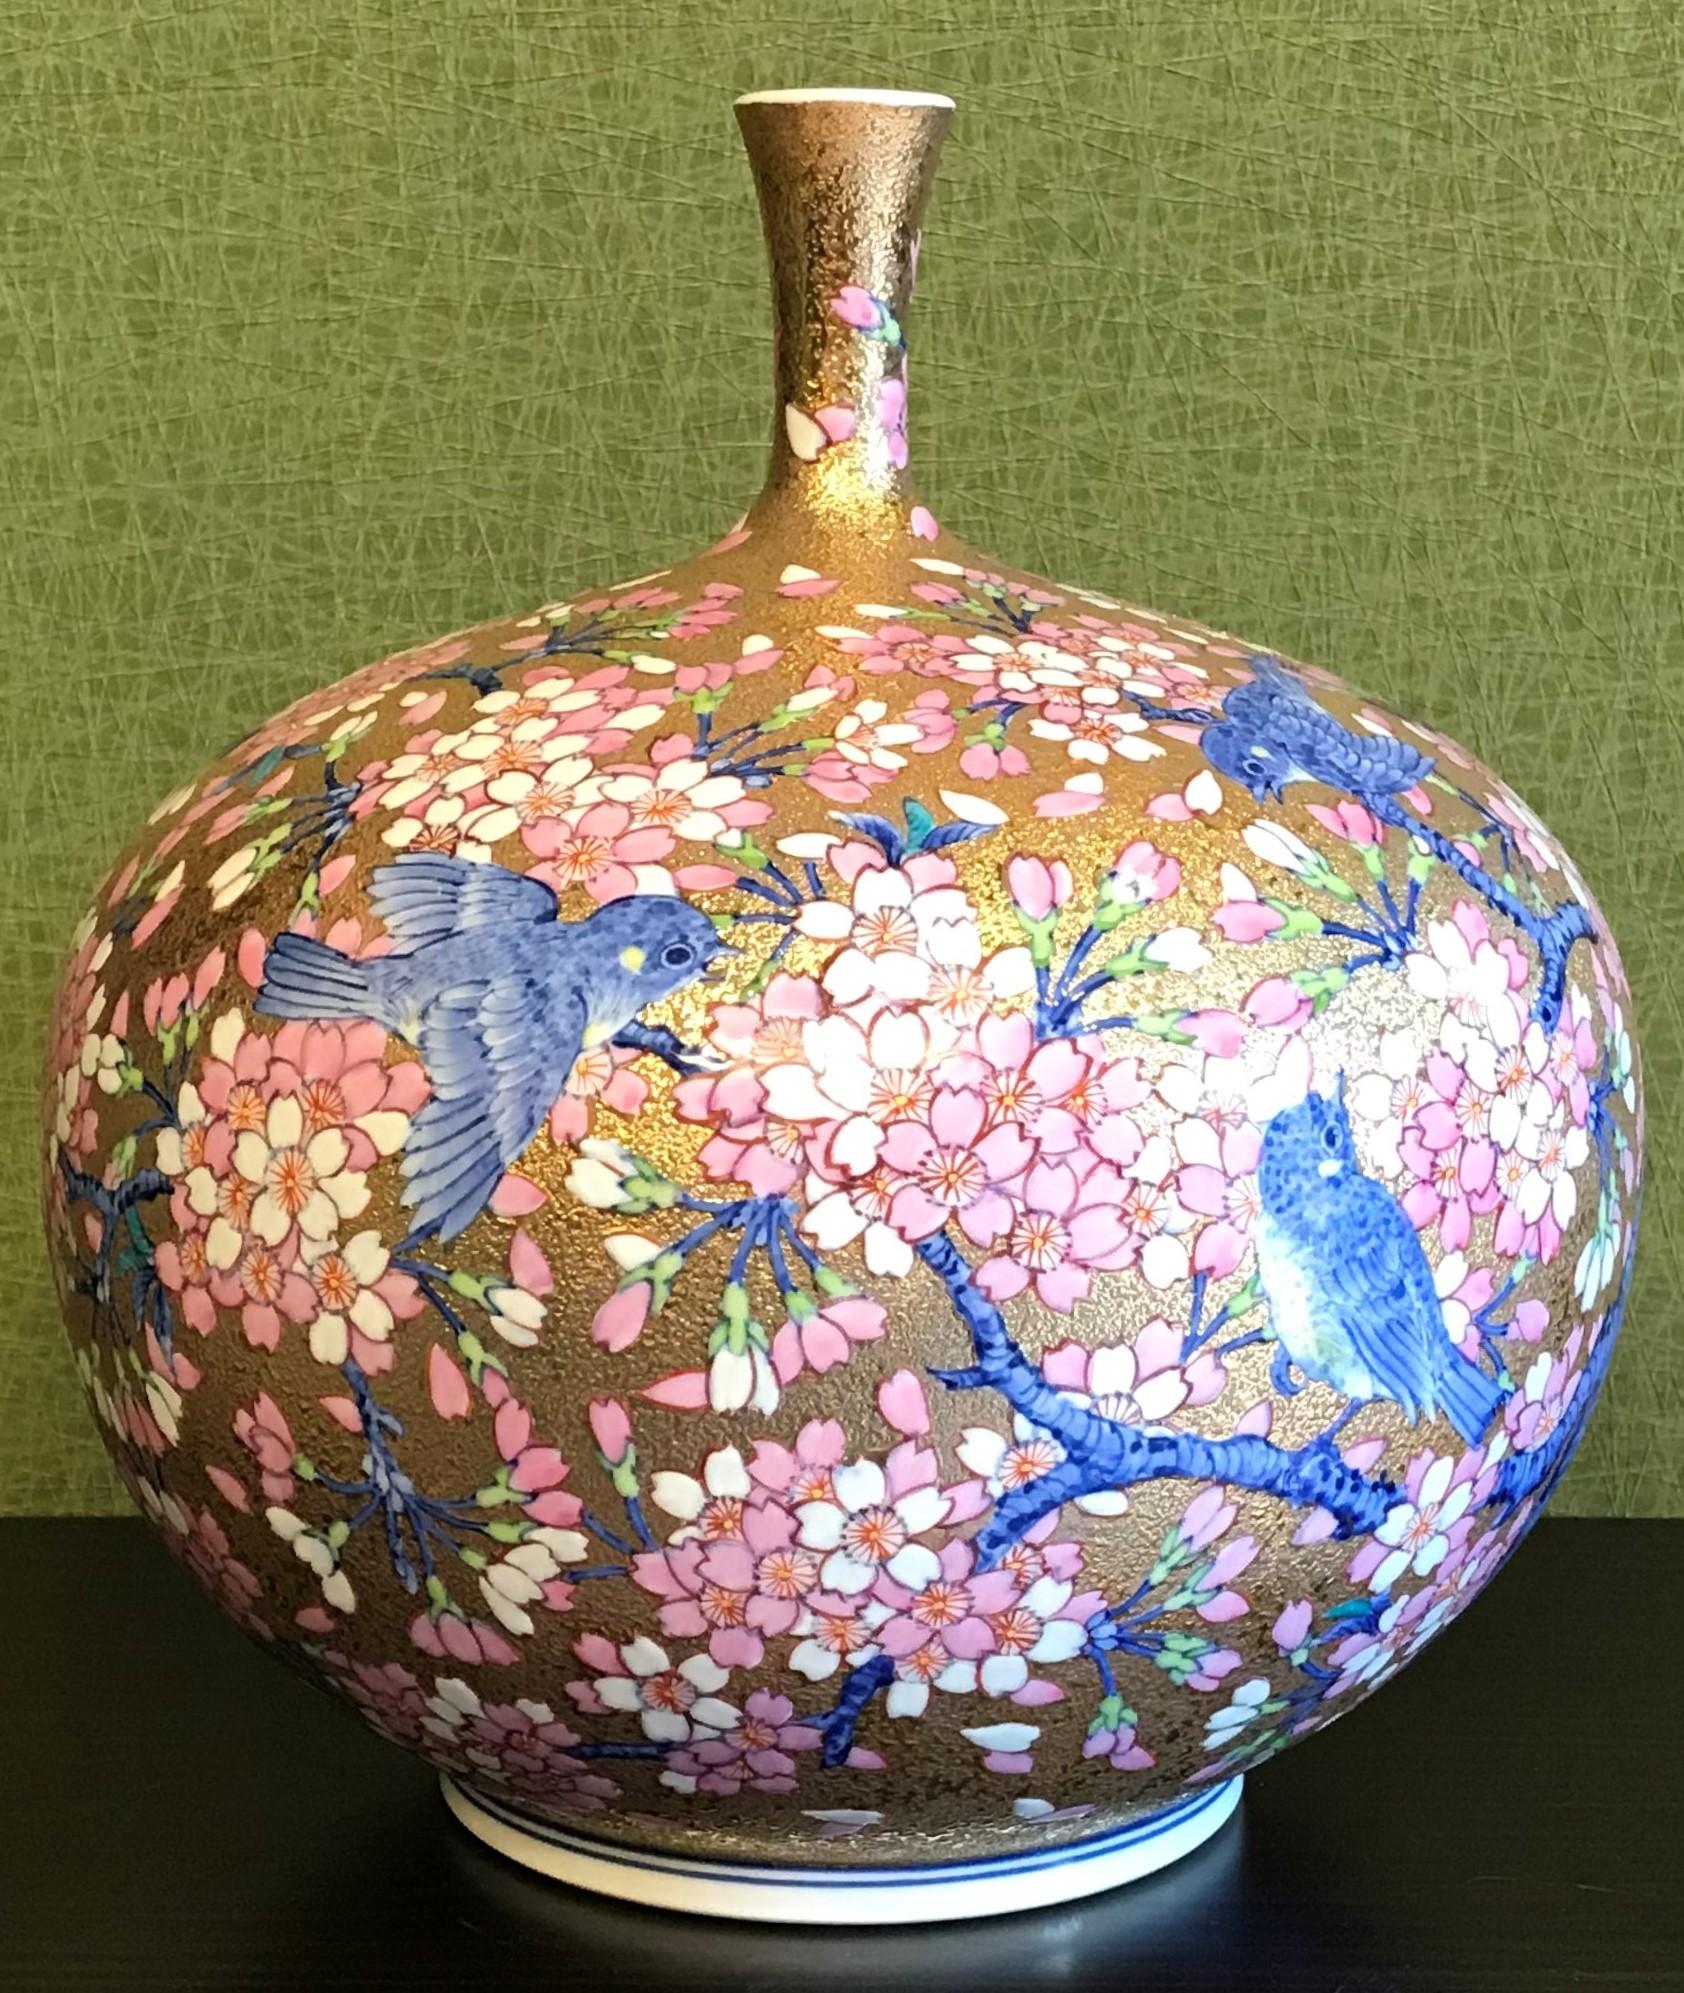 Breathtaking contemporary Japanese gilded long-neck porcelain vase, extremely intricately hand painted in pink and blue on an opulently textured gold background. This piece is a masterpiece by highly acclaimed award-winning master porcelain artist